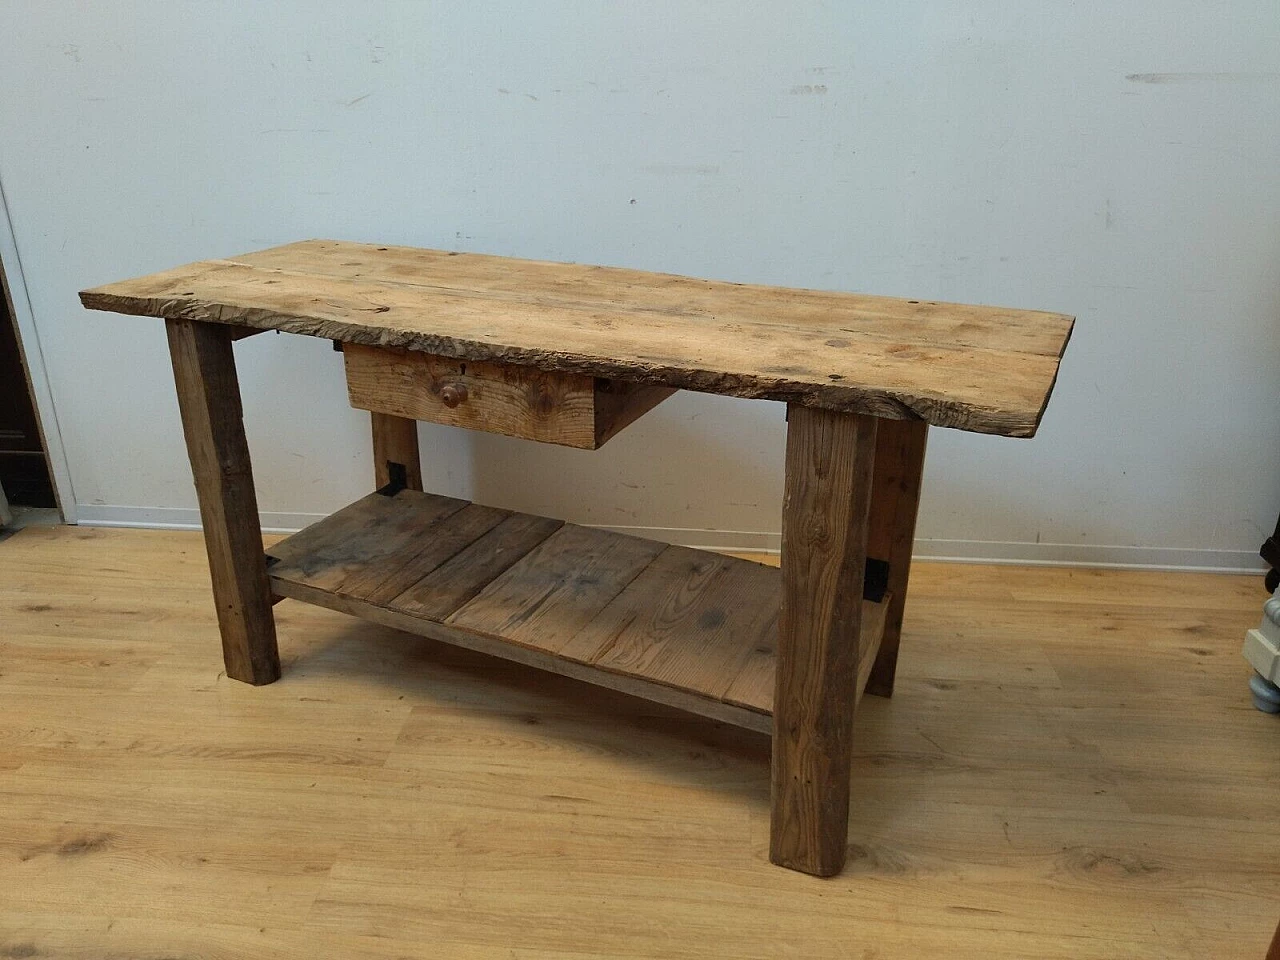 Larch and spruce work table with drawer, early 20th century 21